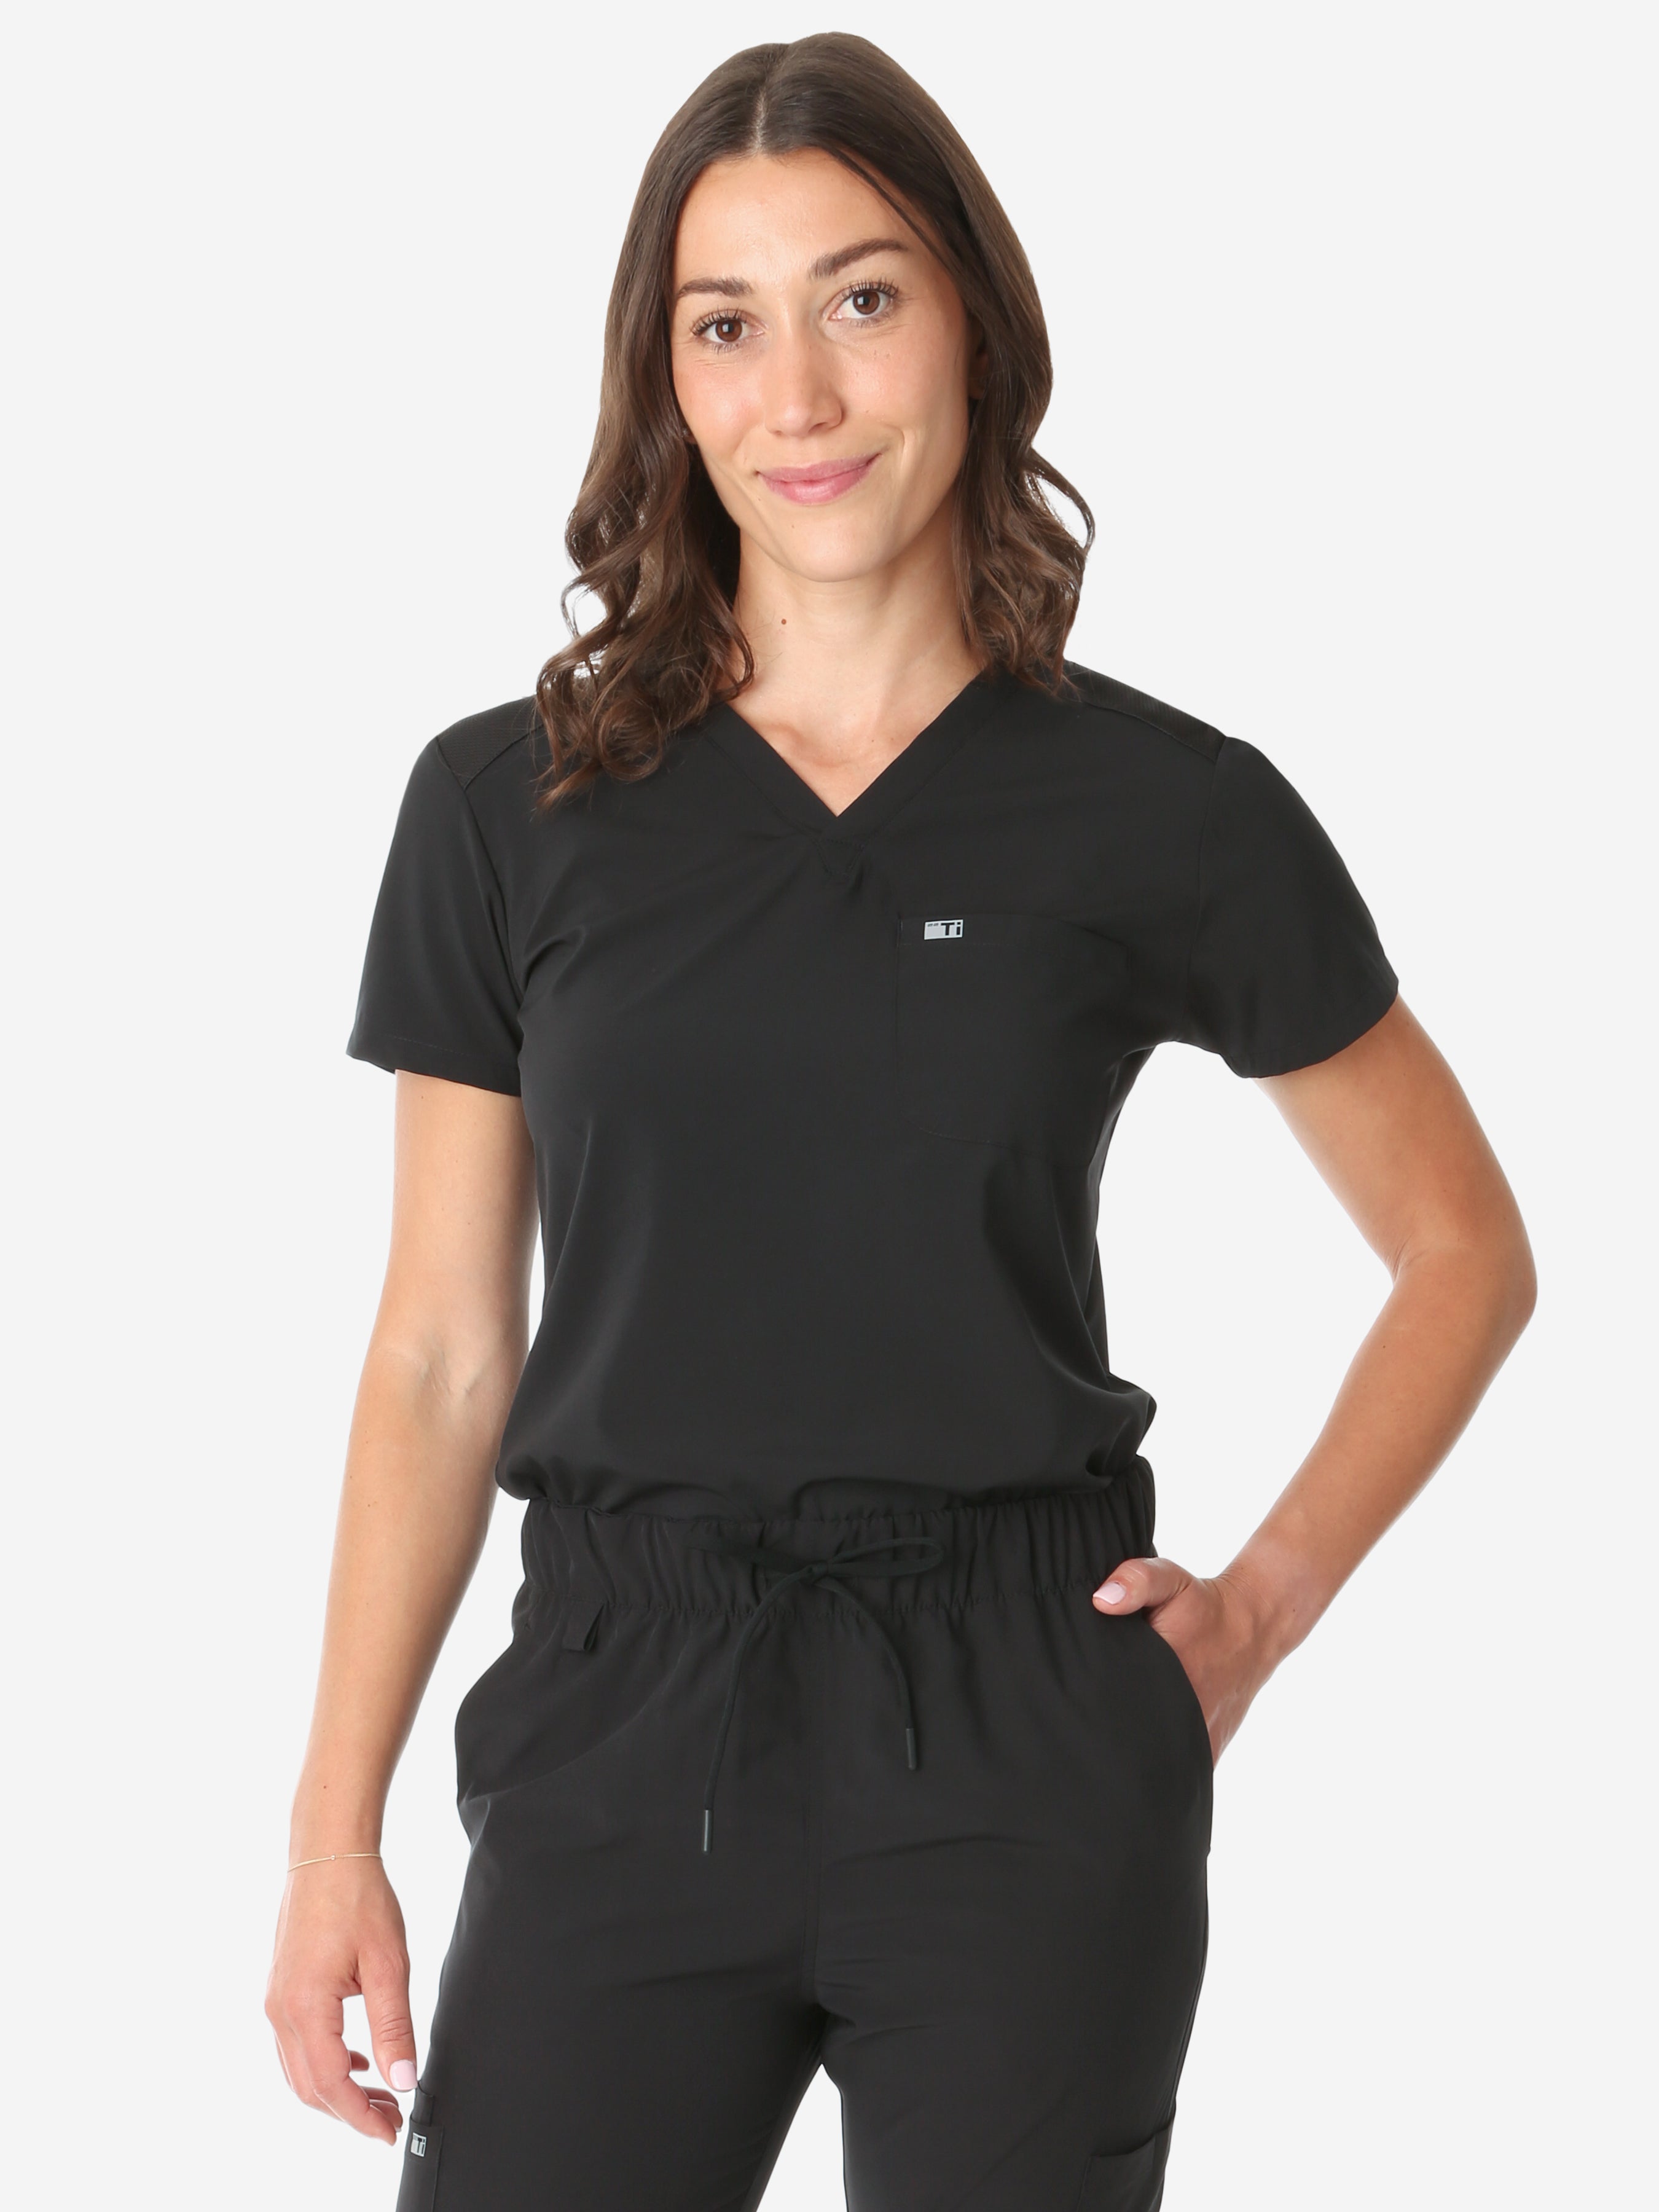 TiScrubs Women's Stretch One-Pocket Scrub Top Real Black Tucked Front Top Only